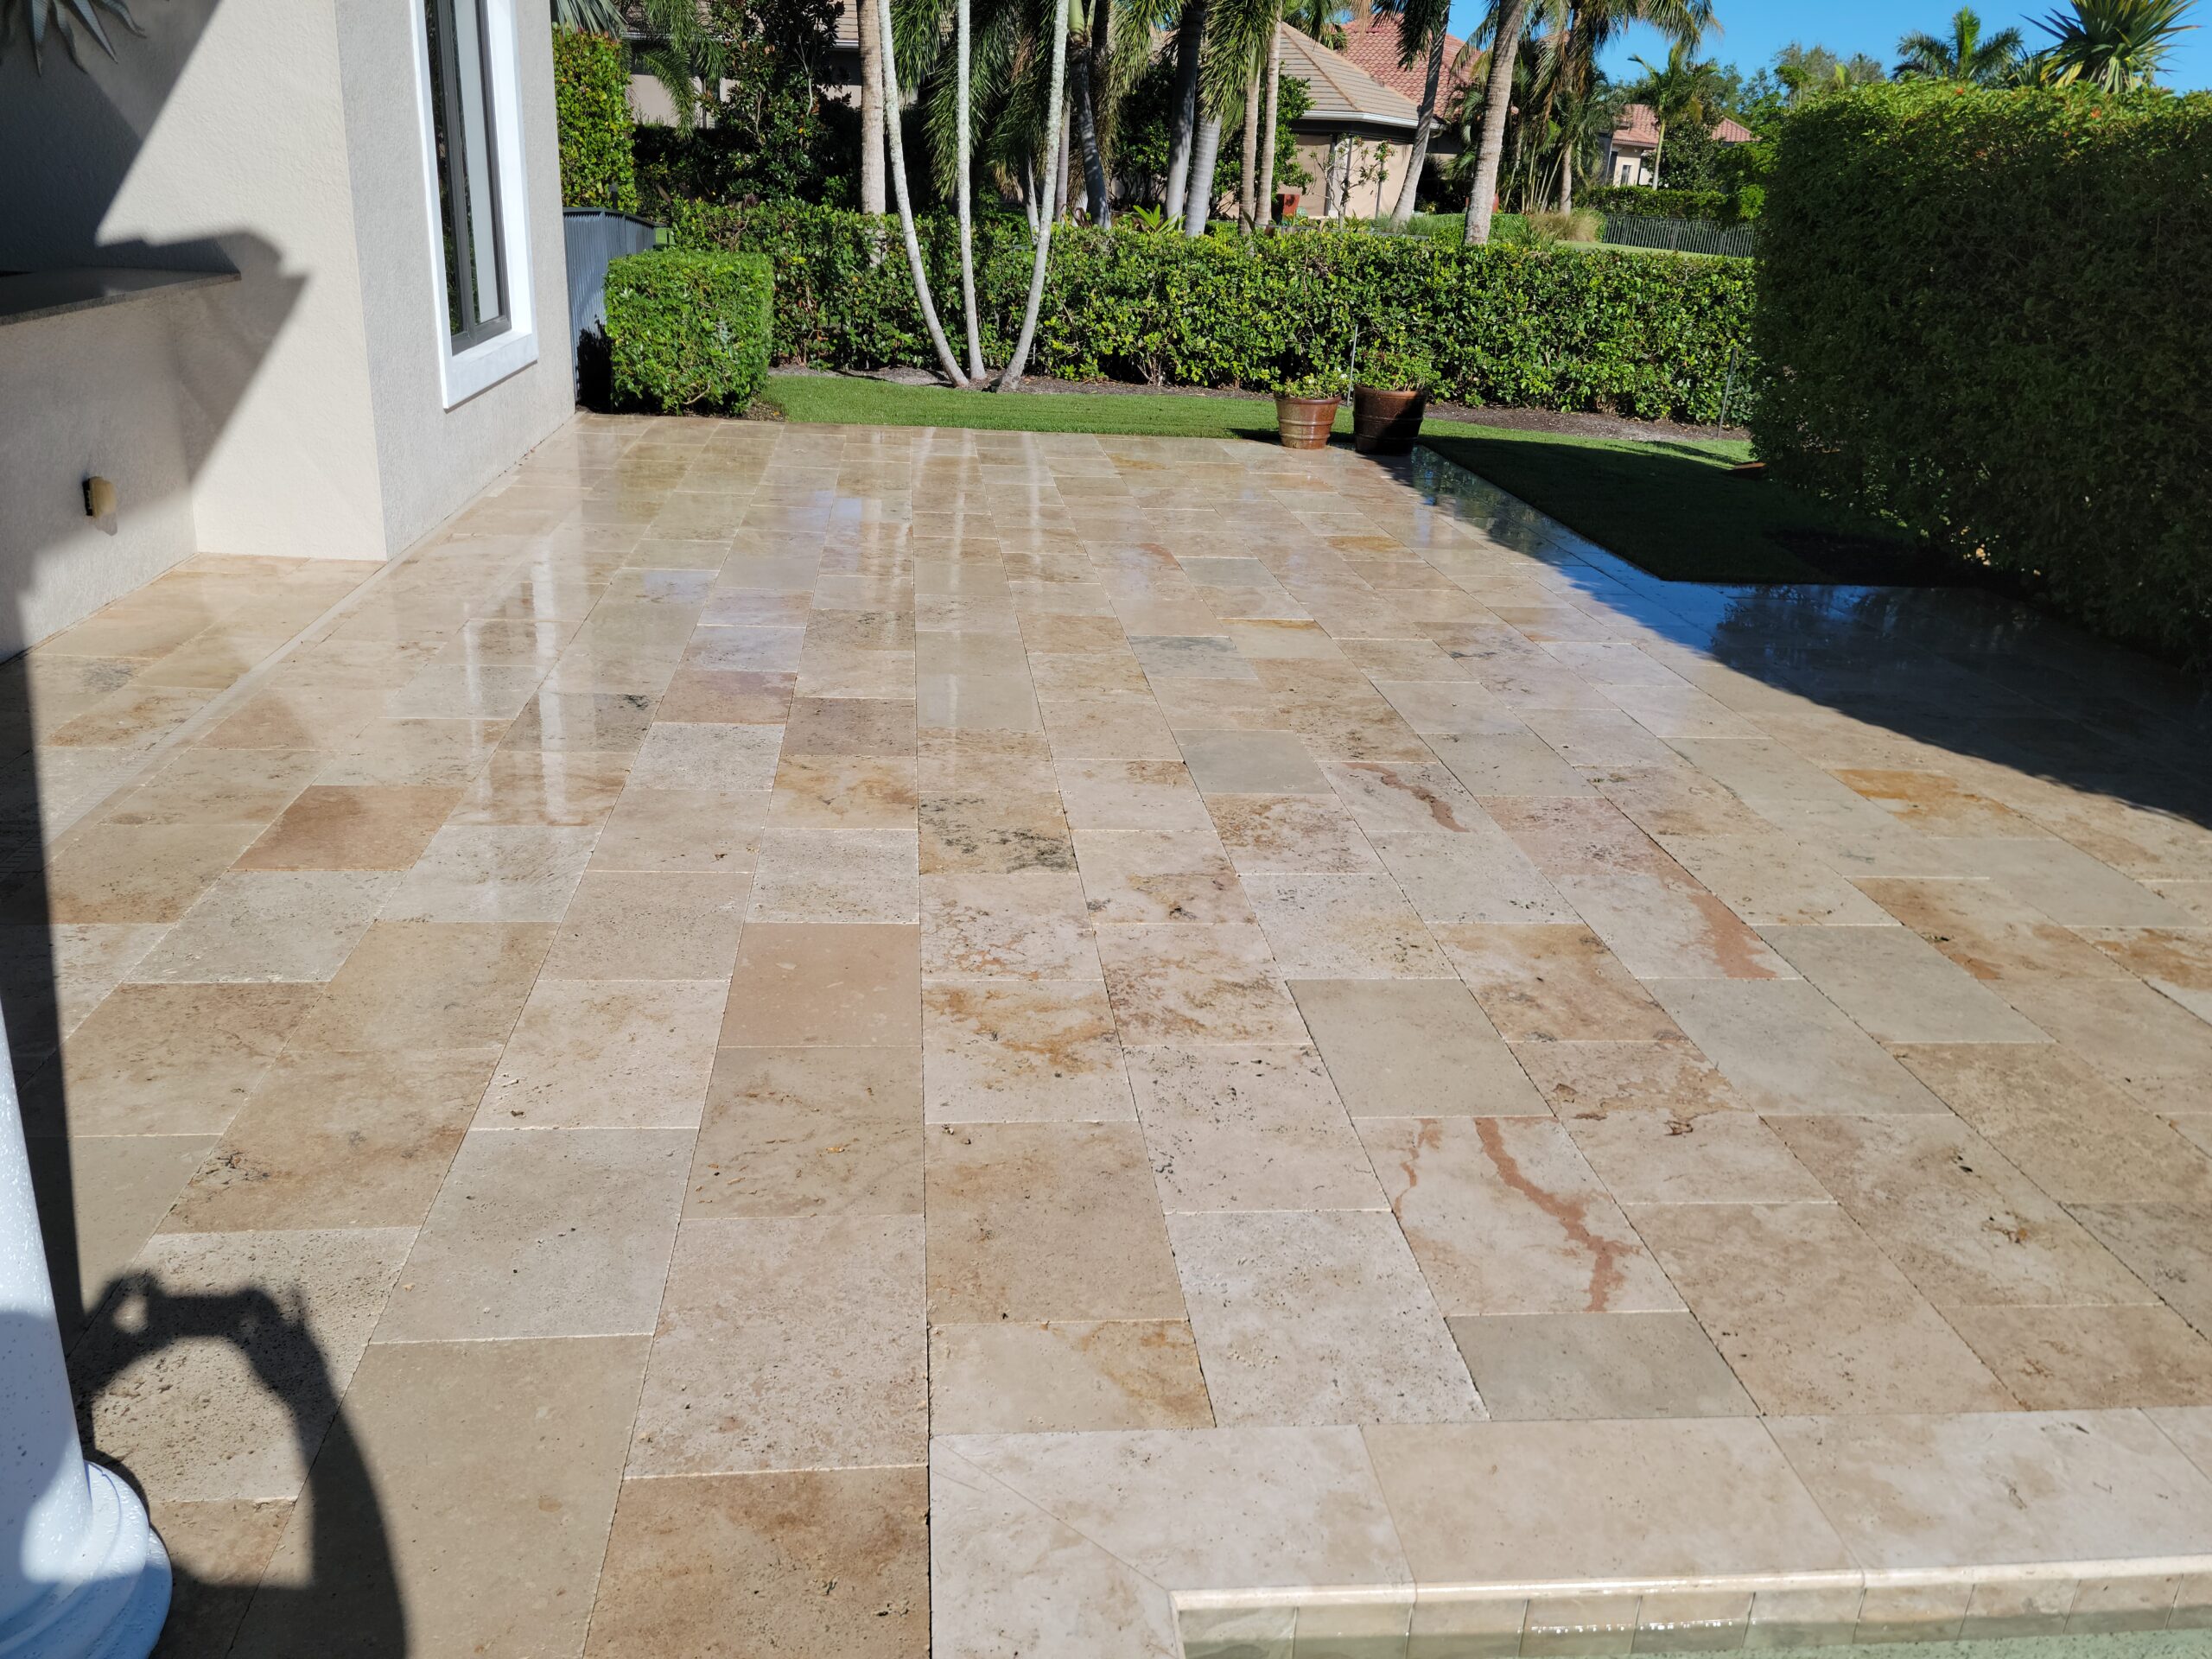 A Naples home patio revitalized by Pinnacle's expert pressure washing.